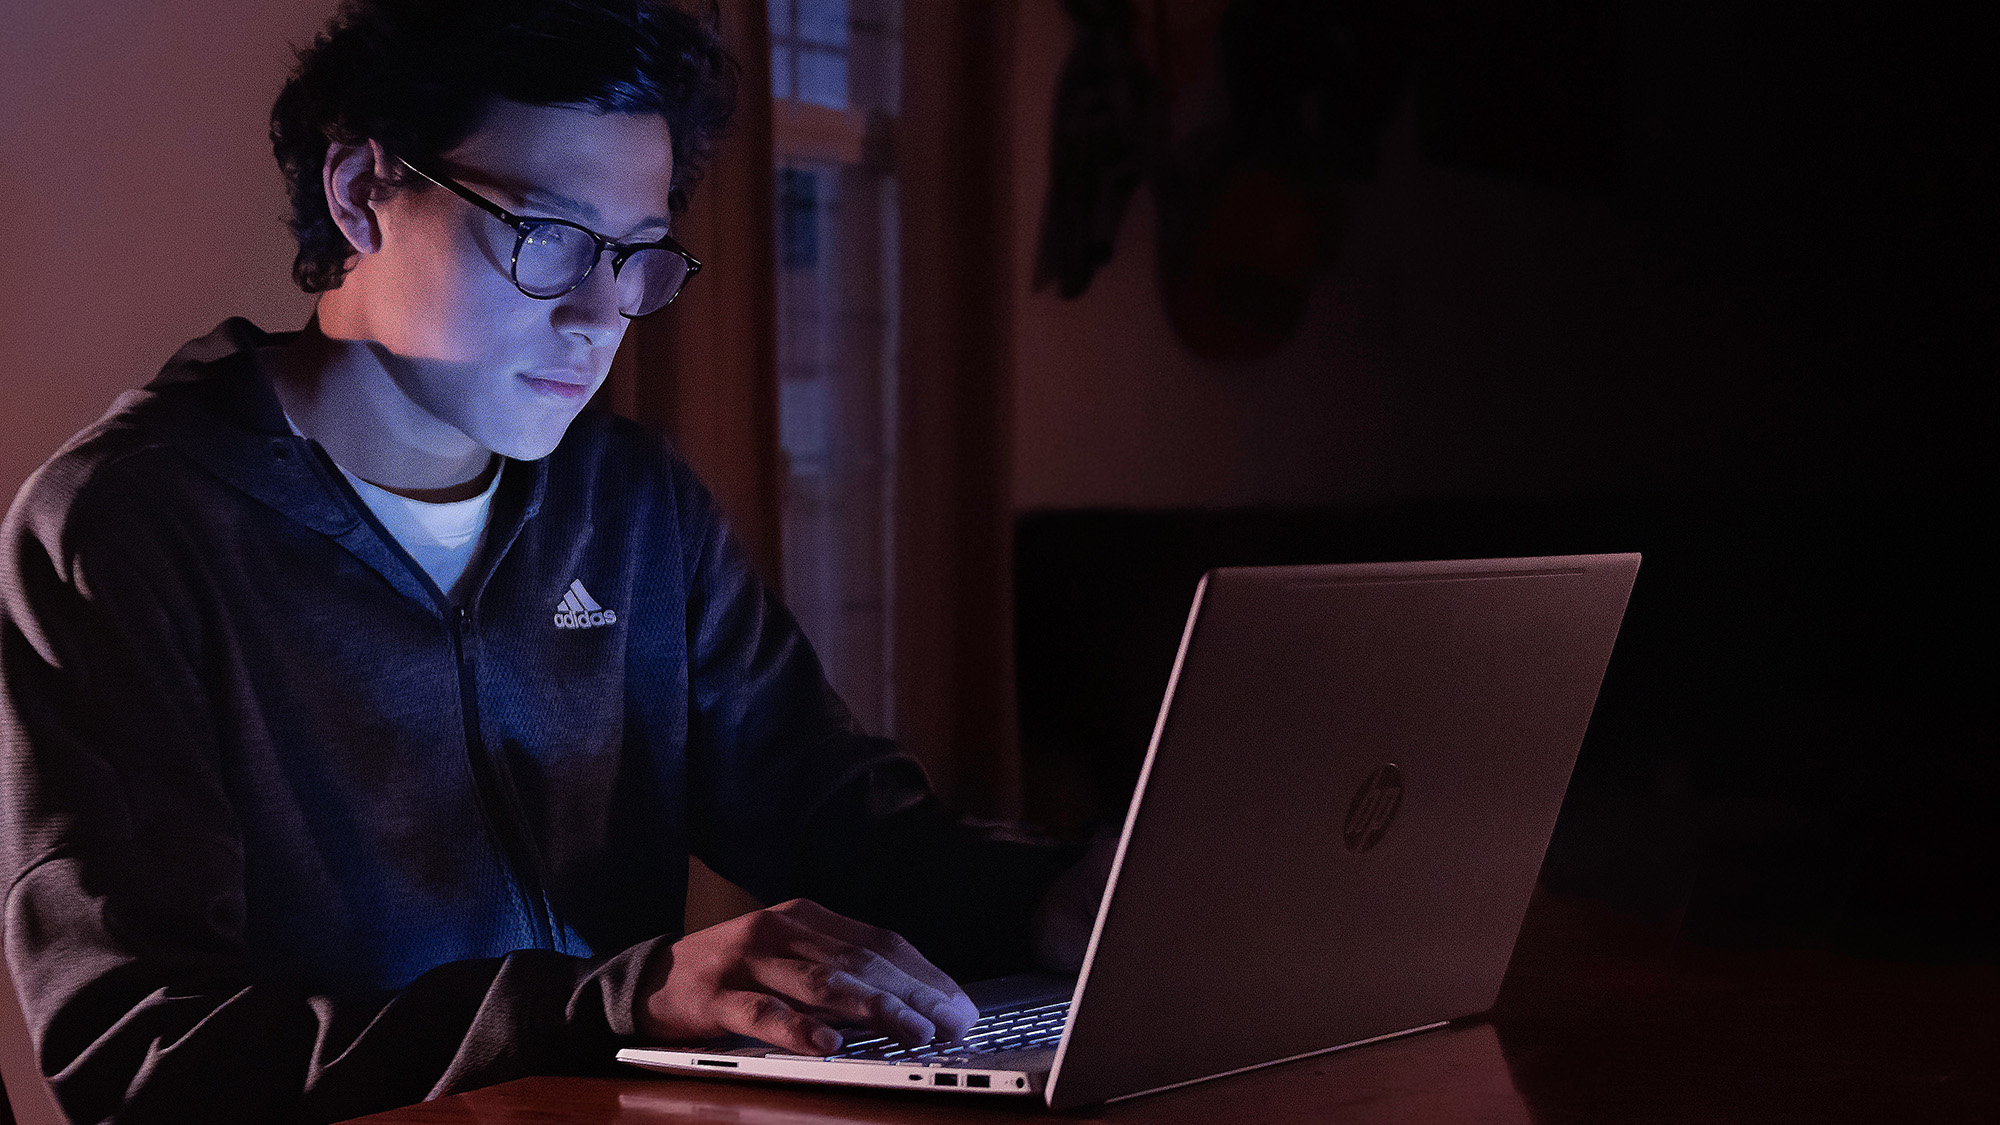 Person with glasses working on computer in the dark, probably trying to find dark patterns on websites.